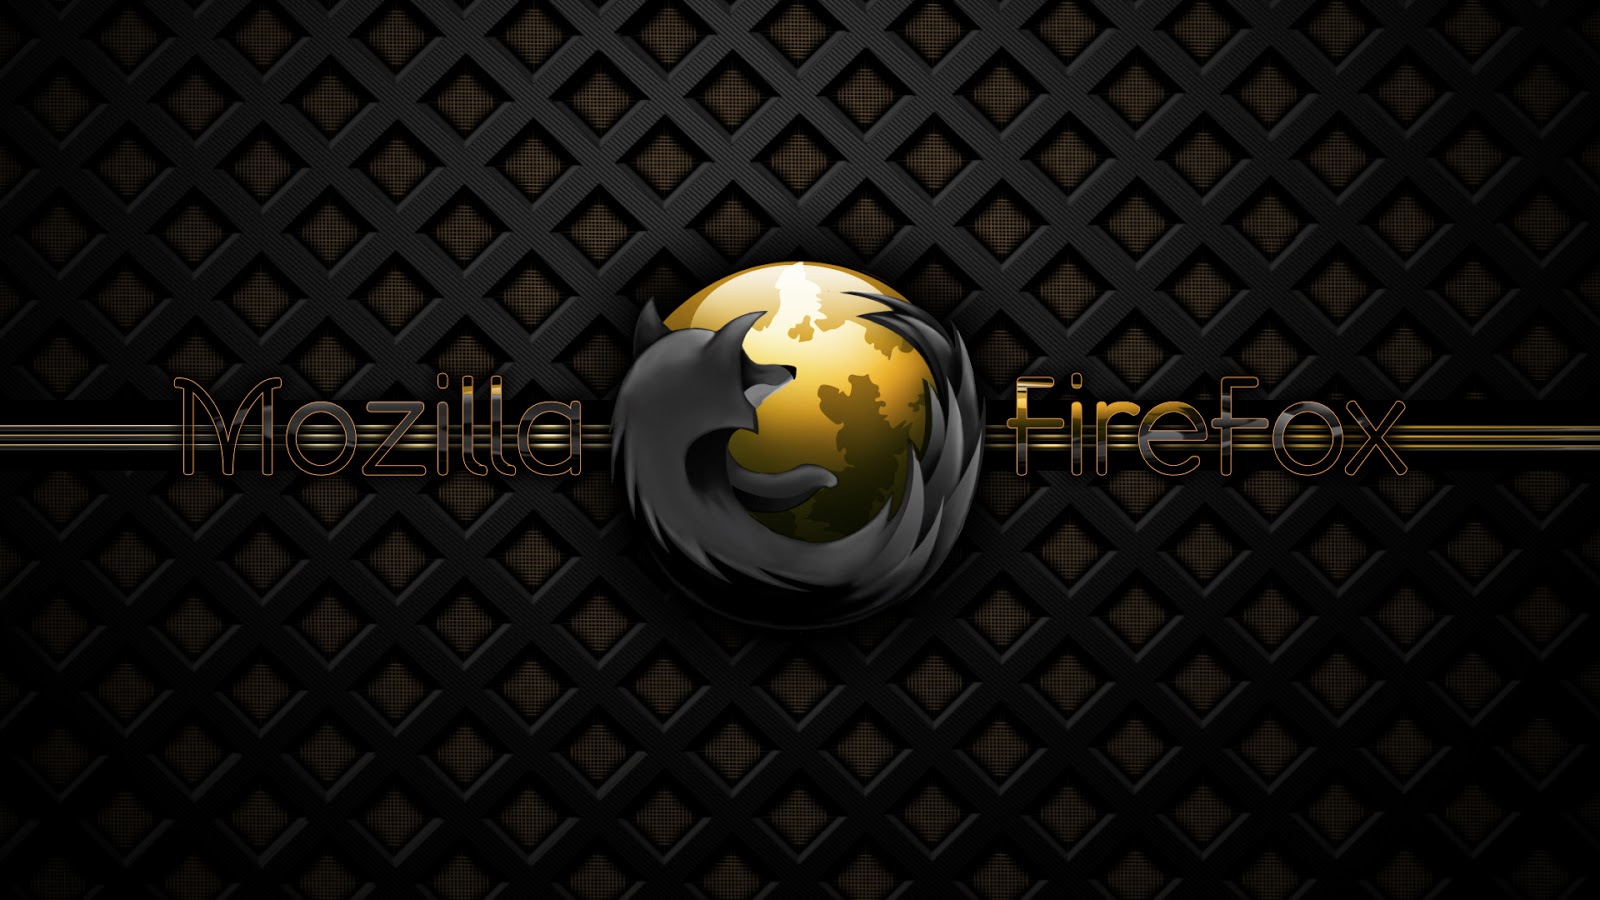 That Was It Below There Is Mozilla Firefox Wallpaper Pretty Cool